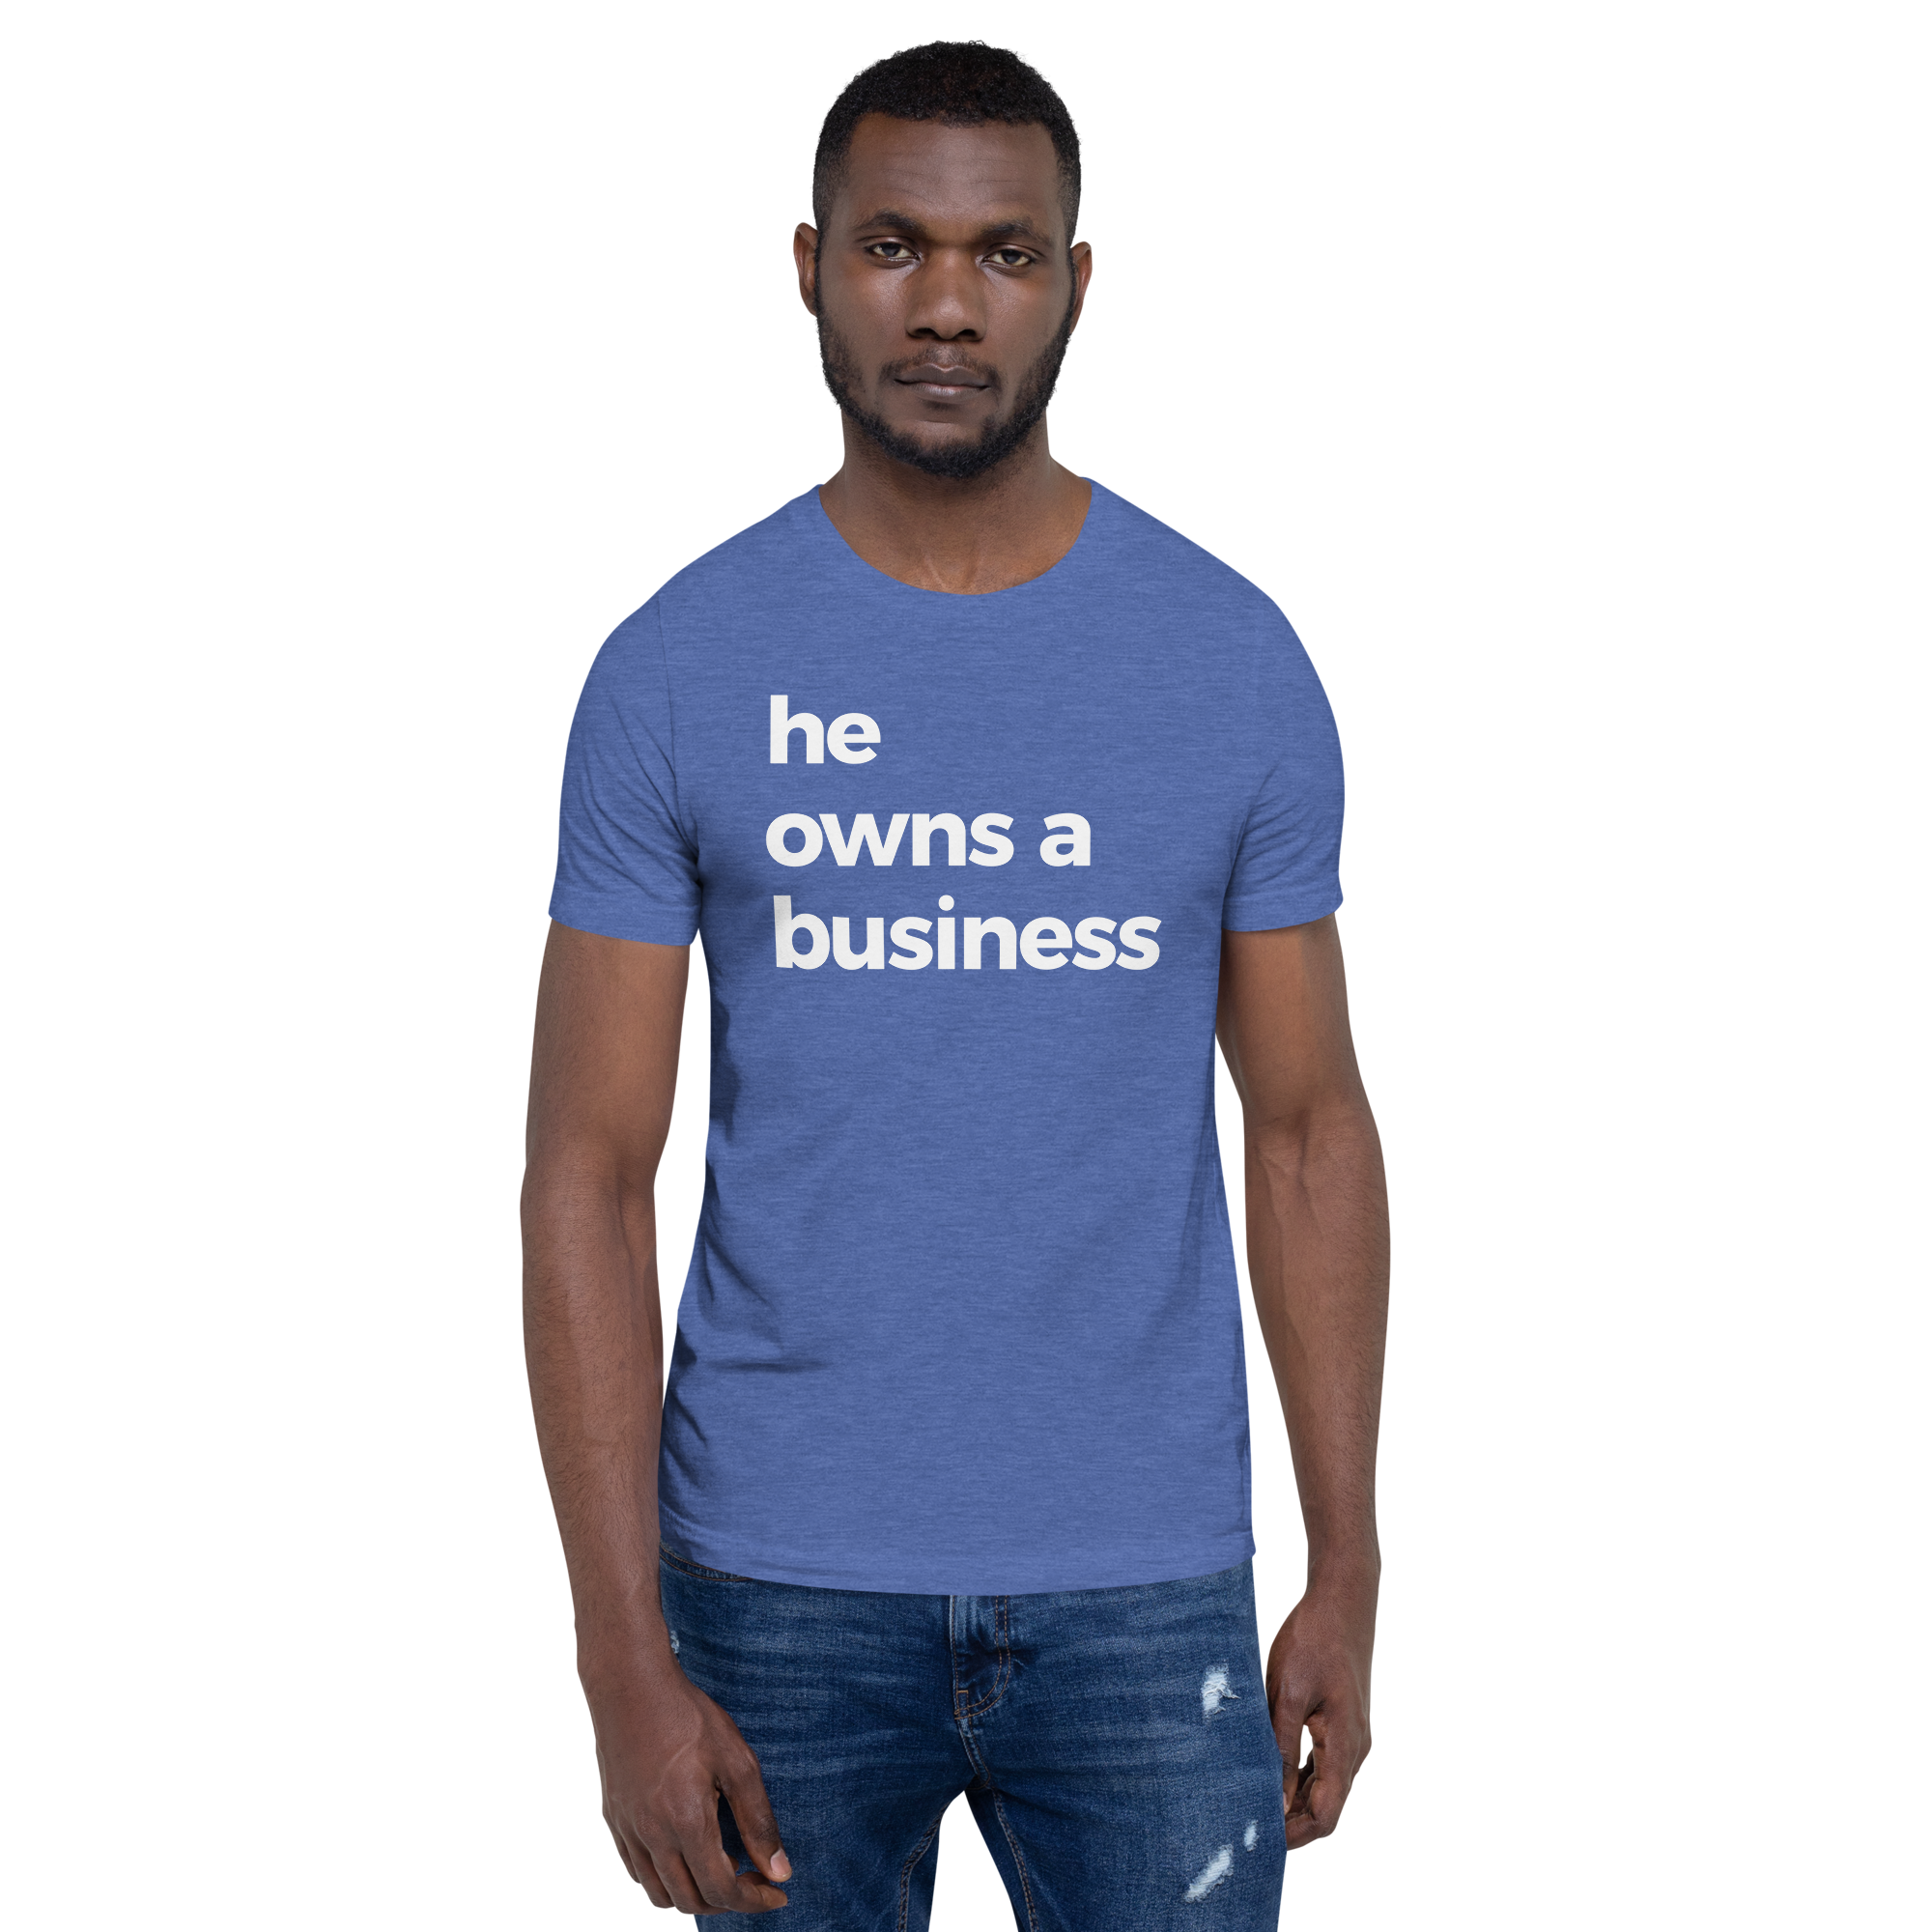 he owns a business tee